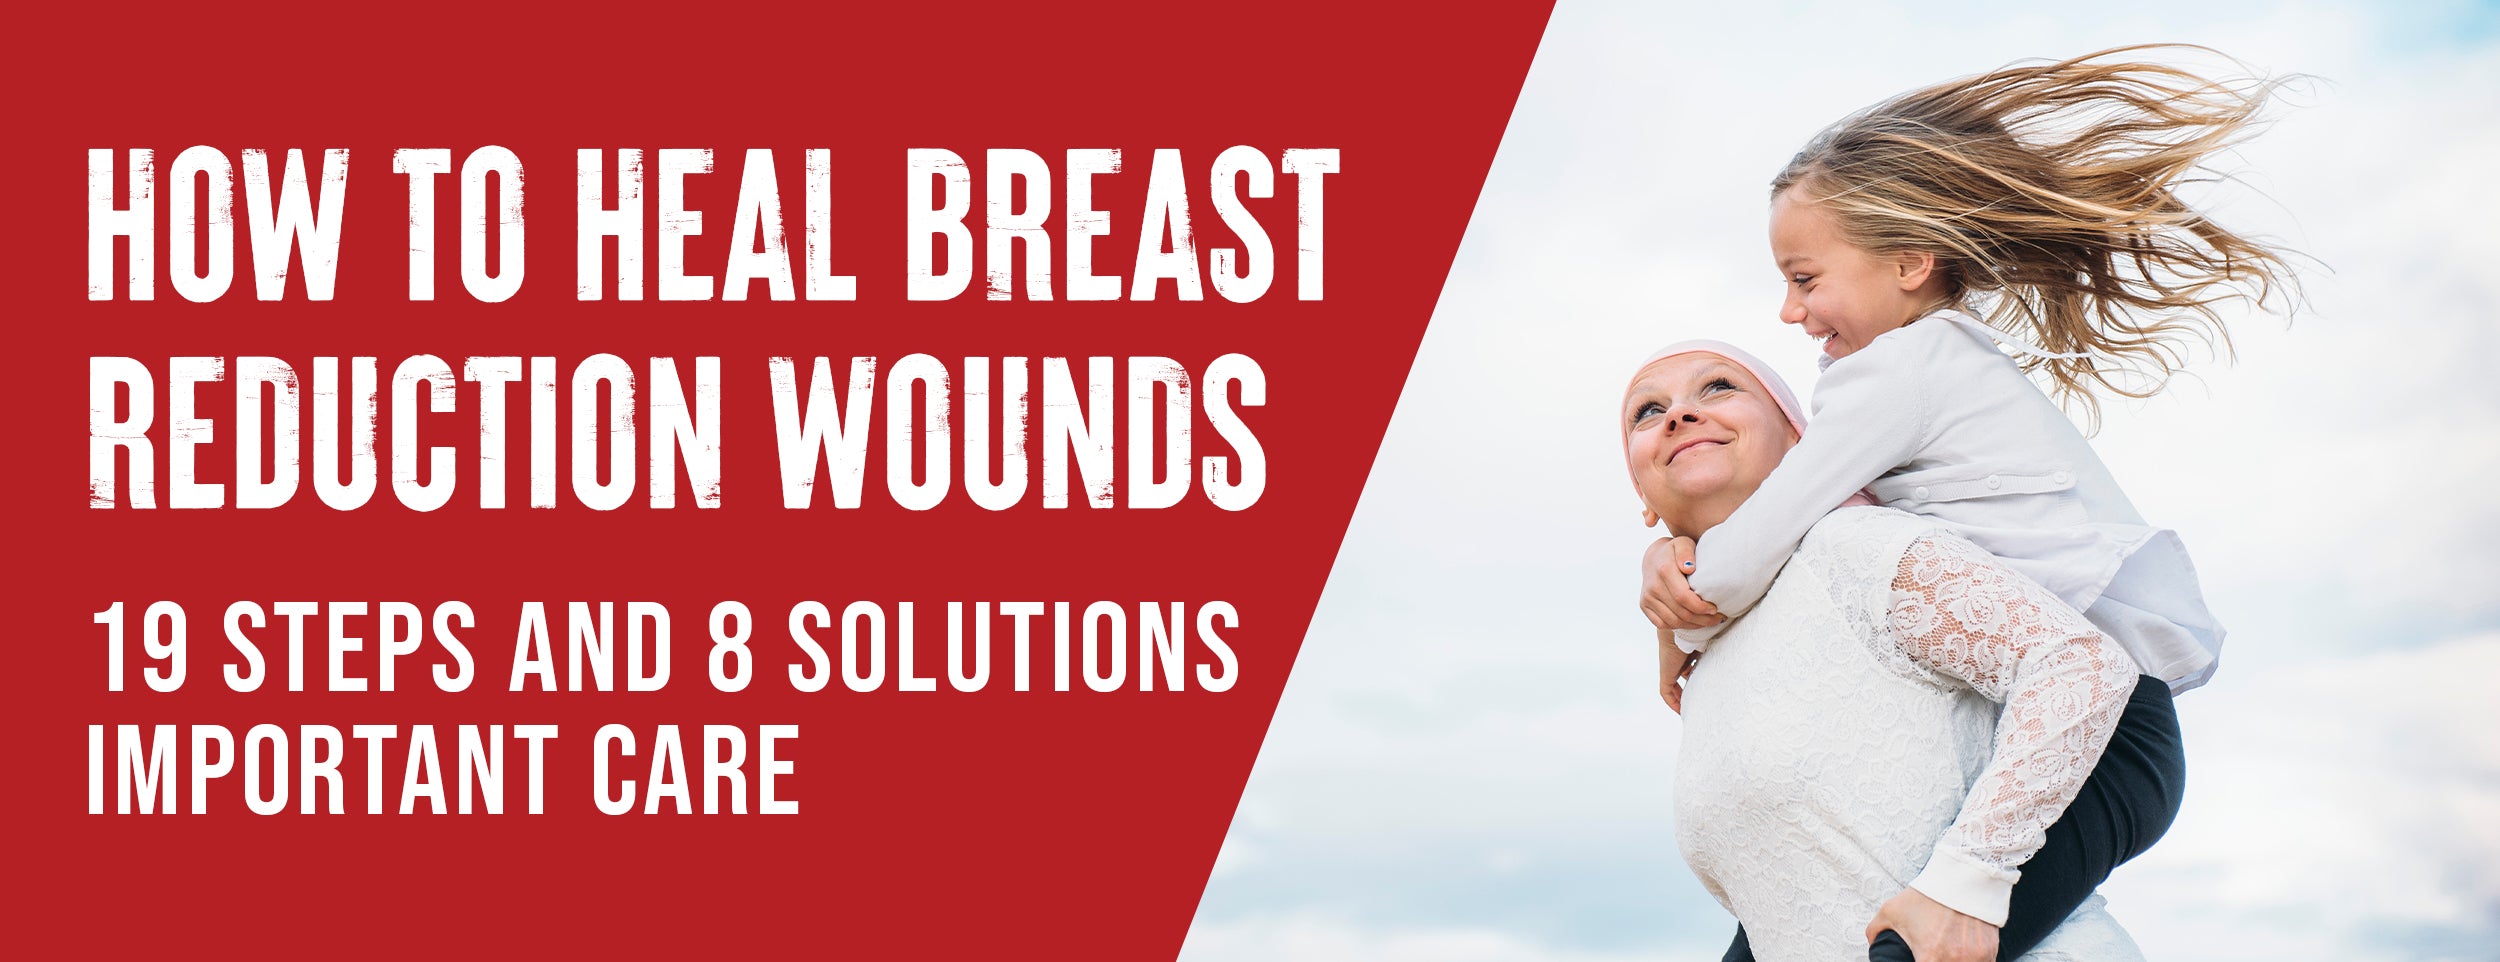 Heal Breast Reduction Wounds